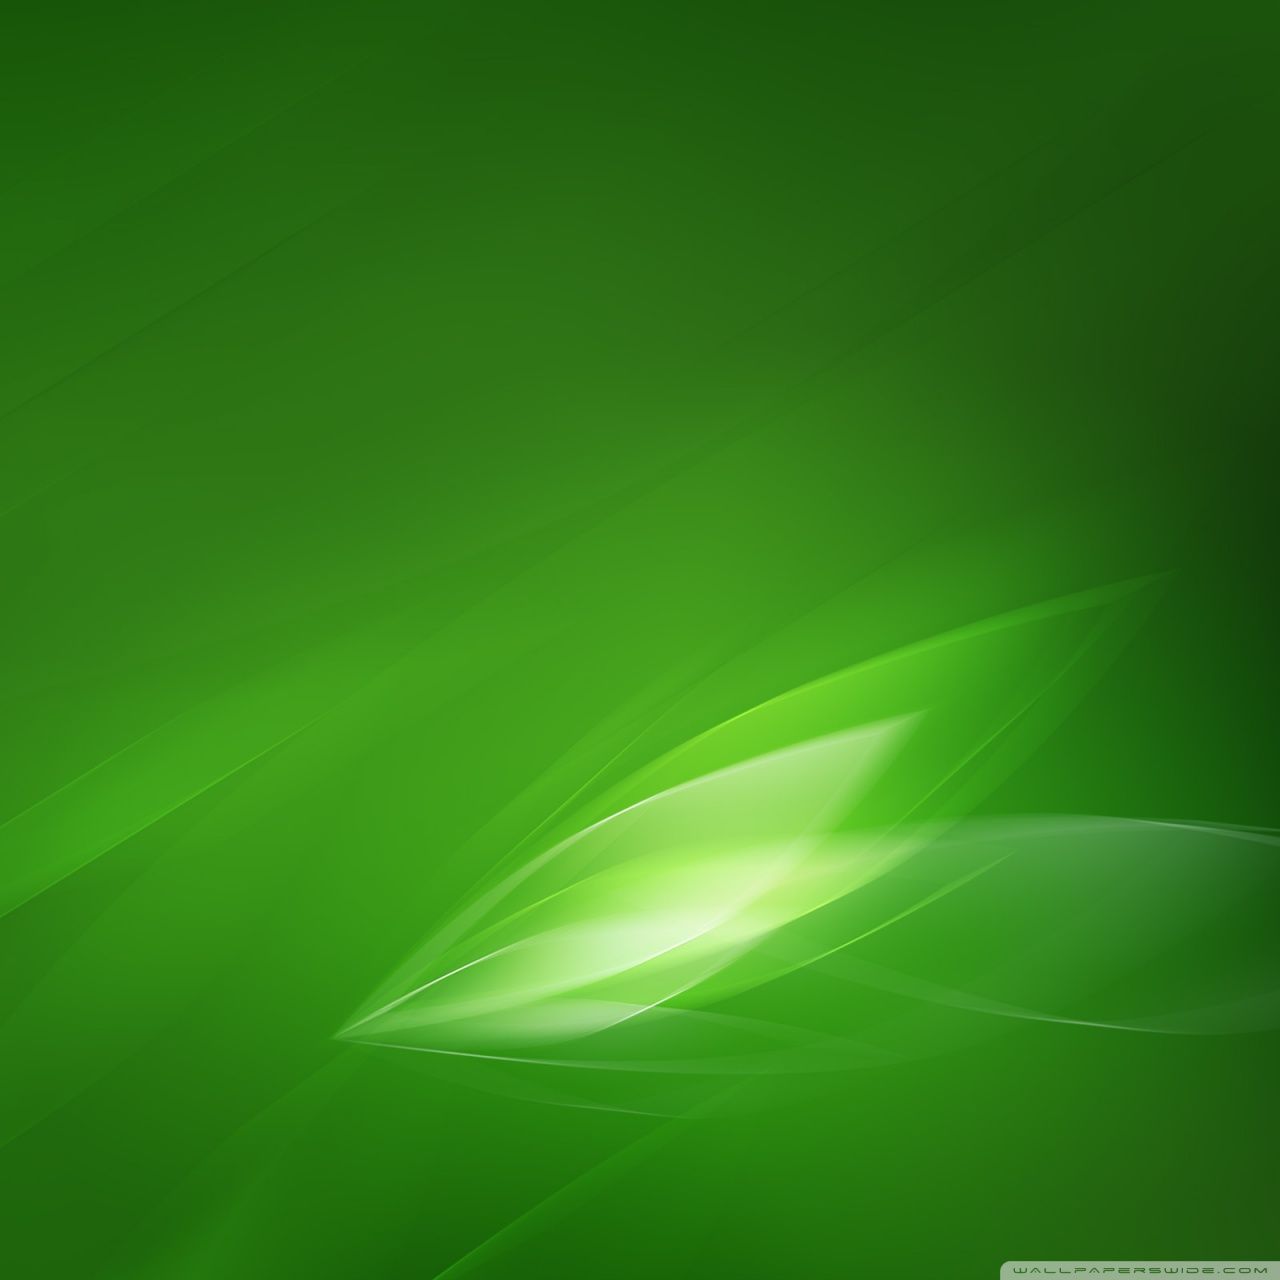 Green Tablet Wallpaper Free Green Tablet Background